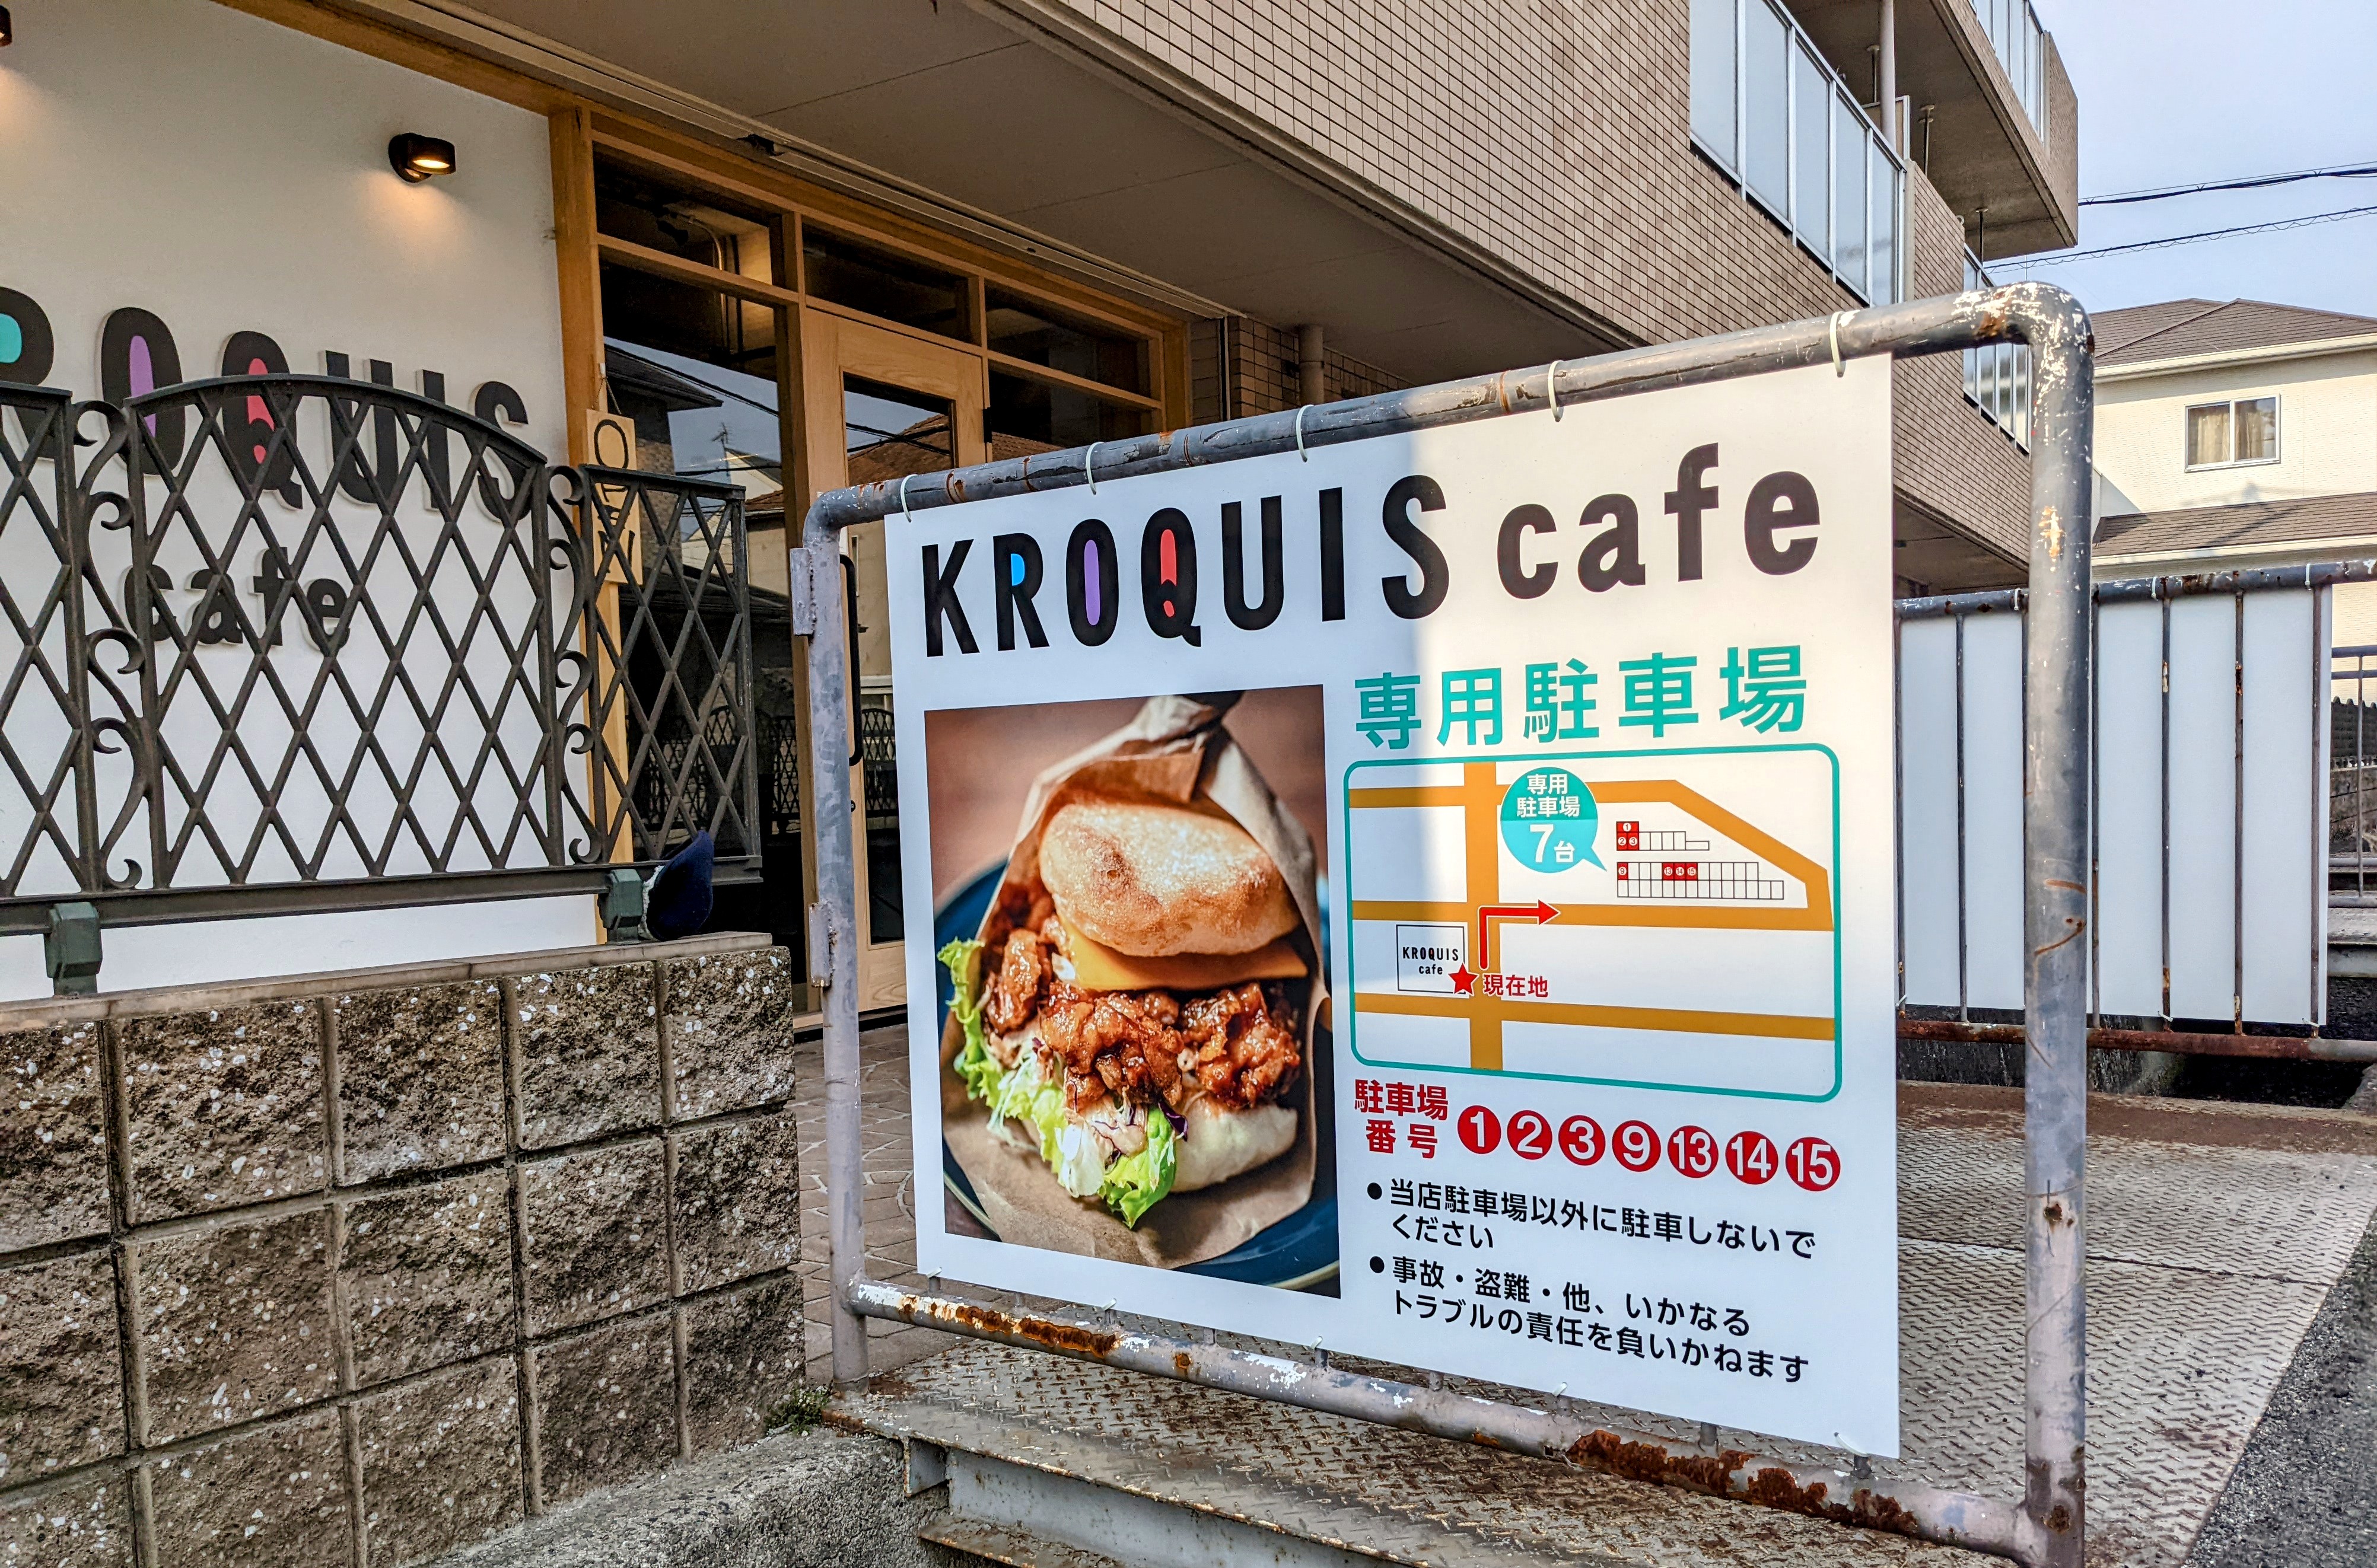 KROQUIS cafeの専用駐車場